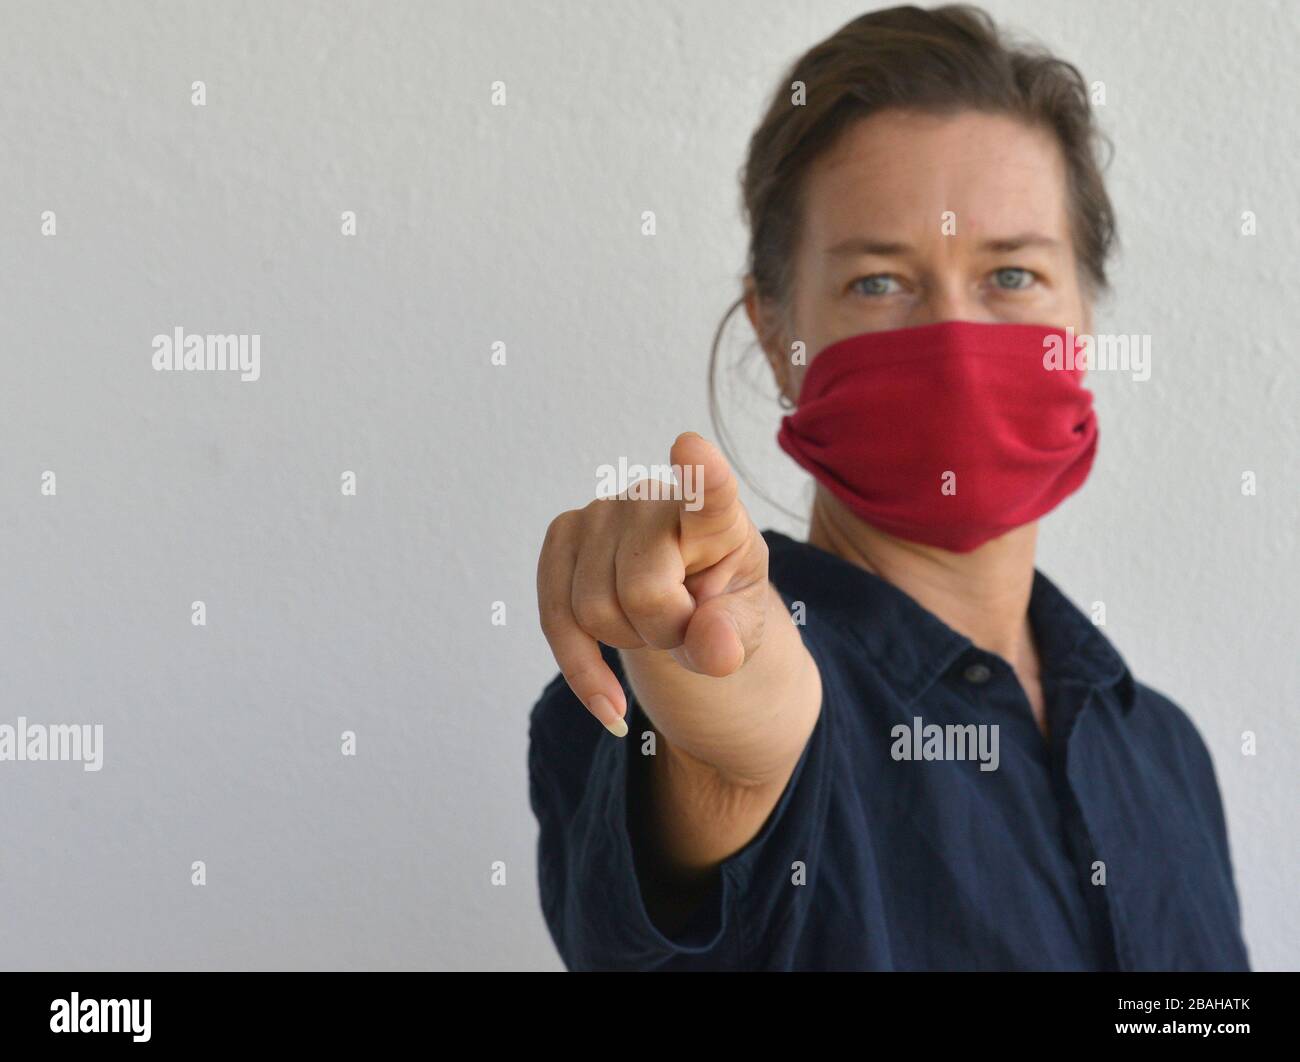 Caucasian woman poses for the camera with her DIY face mask (made from an old t-shirt sleeve) during the 2019/20 corona-virus outbreak. Stock Photo